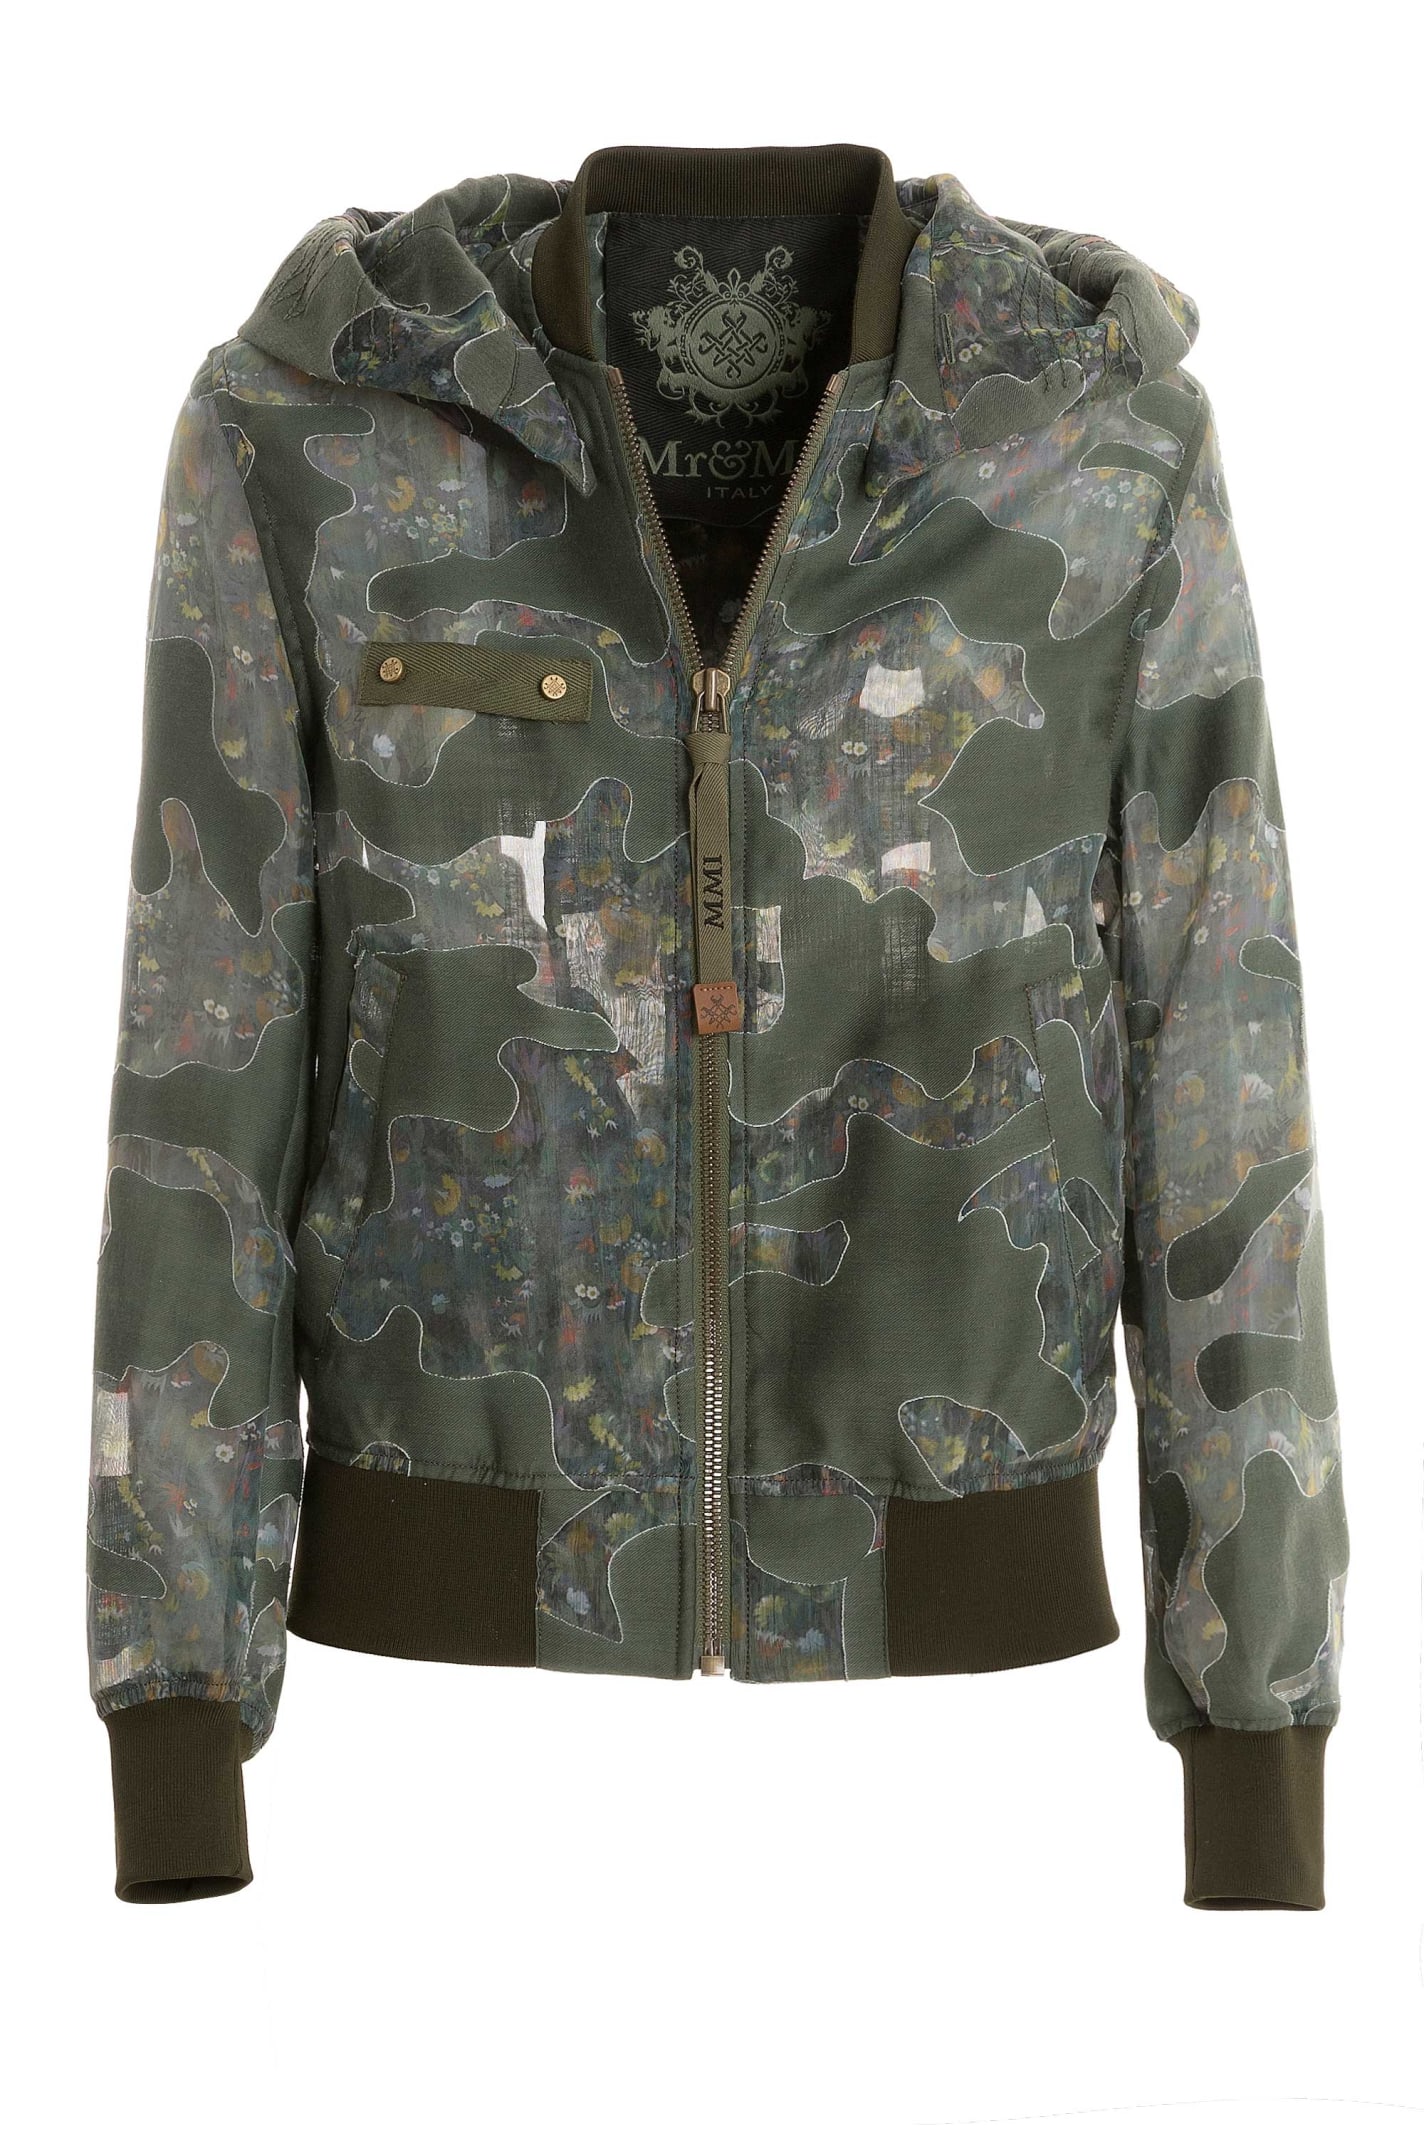 Mr & Mrs Italy Camouflage Embroidered Organdy Bomber